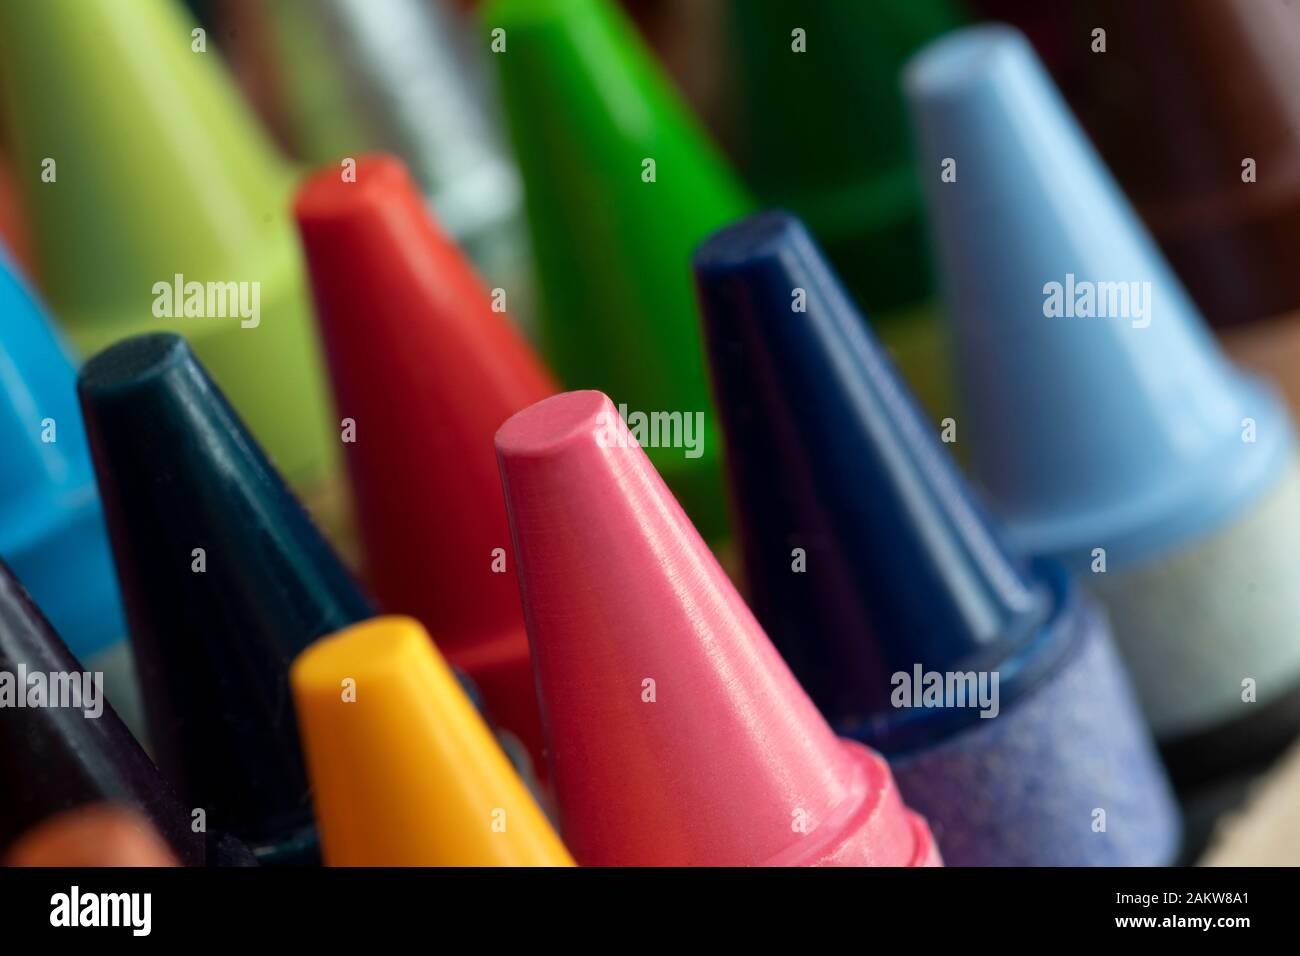 Brand new, colorful crayons packed neatly together in a box. Stock Photo